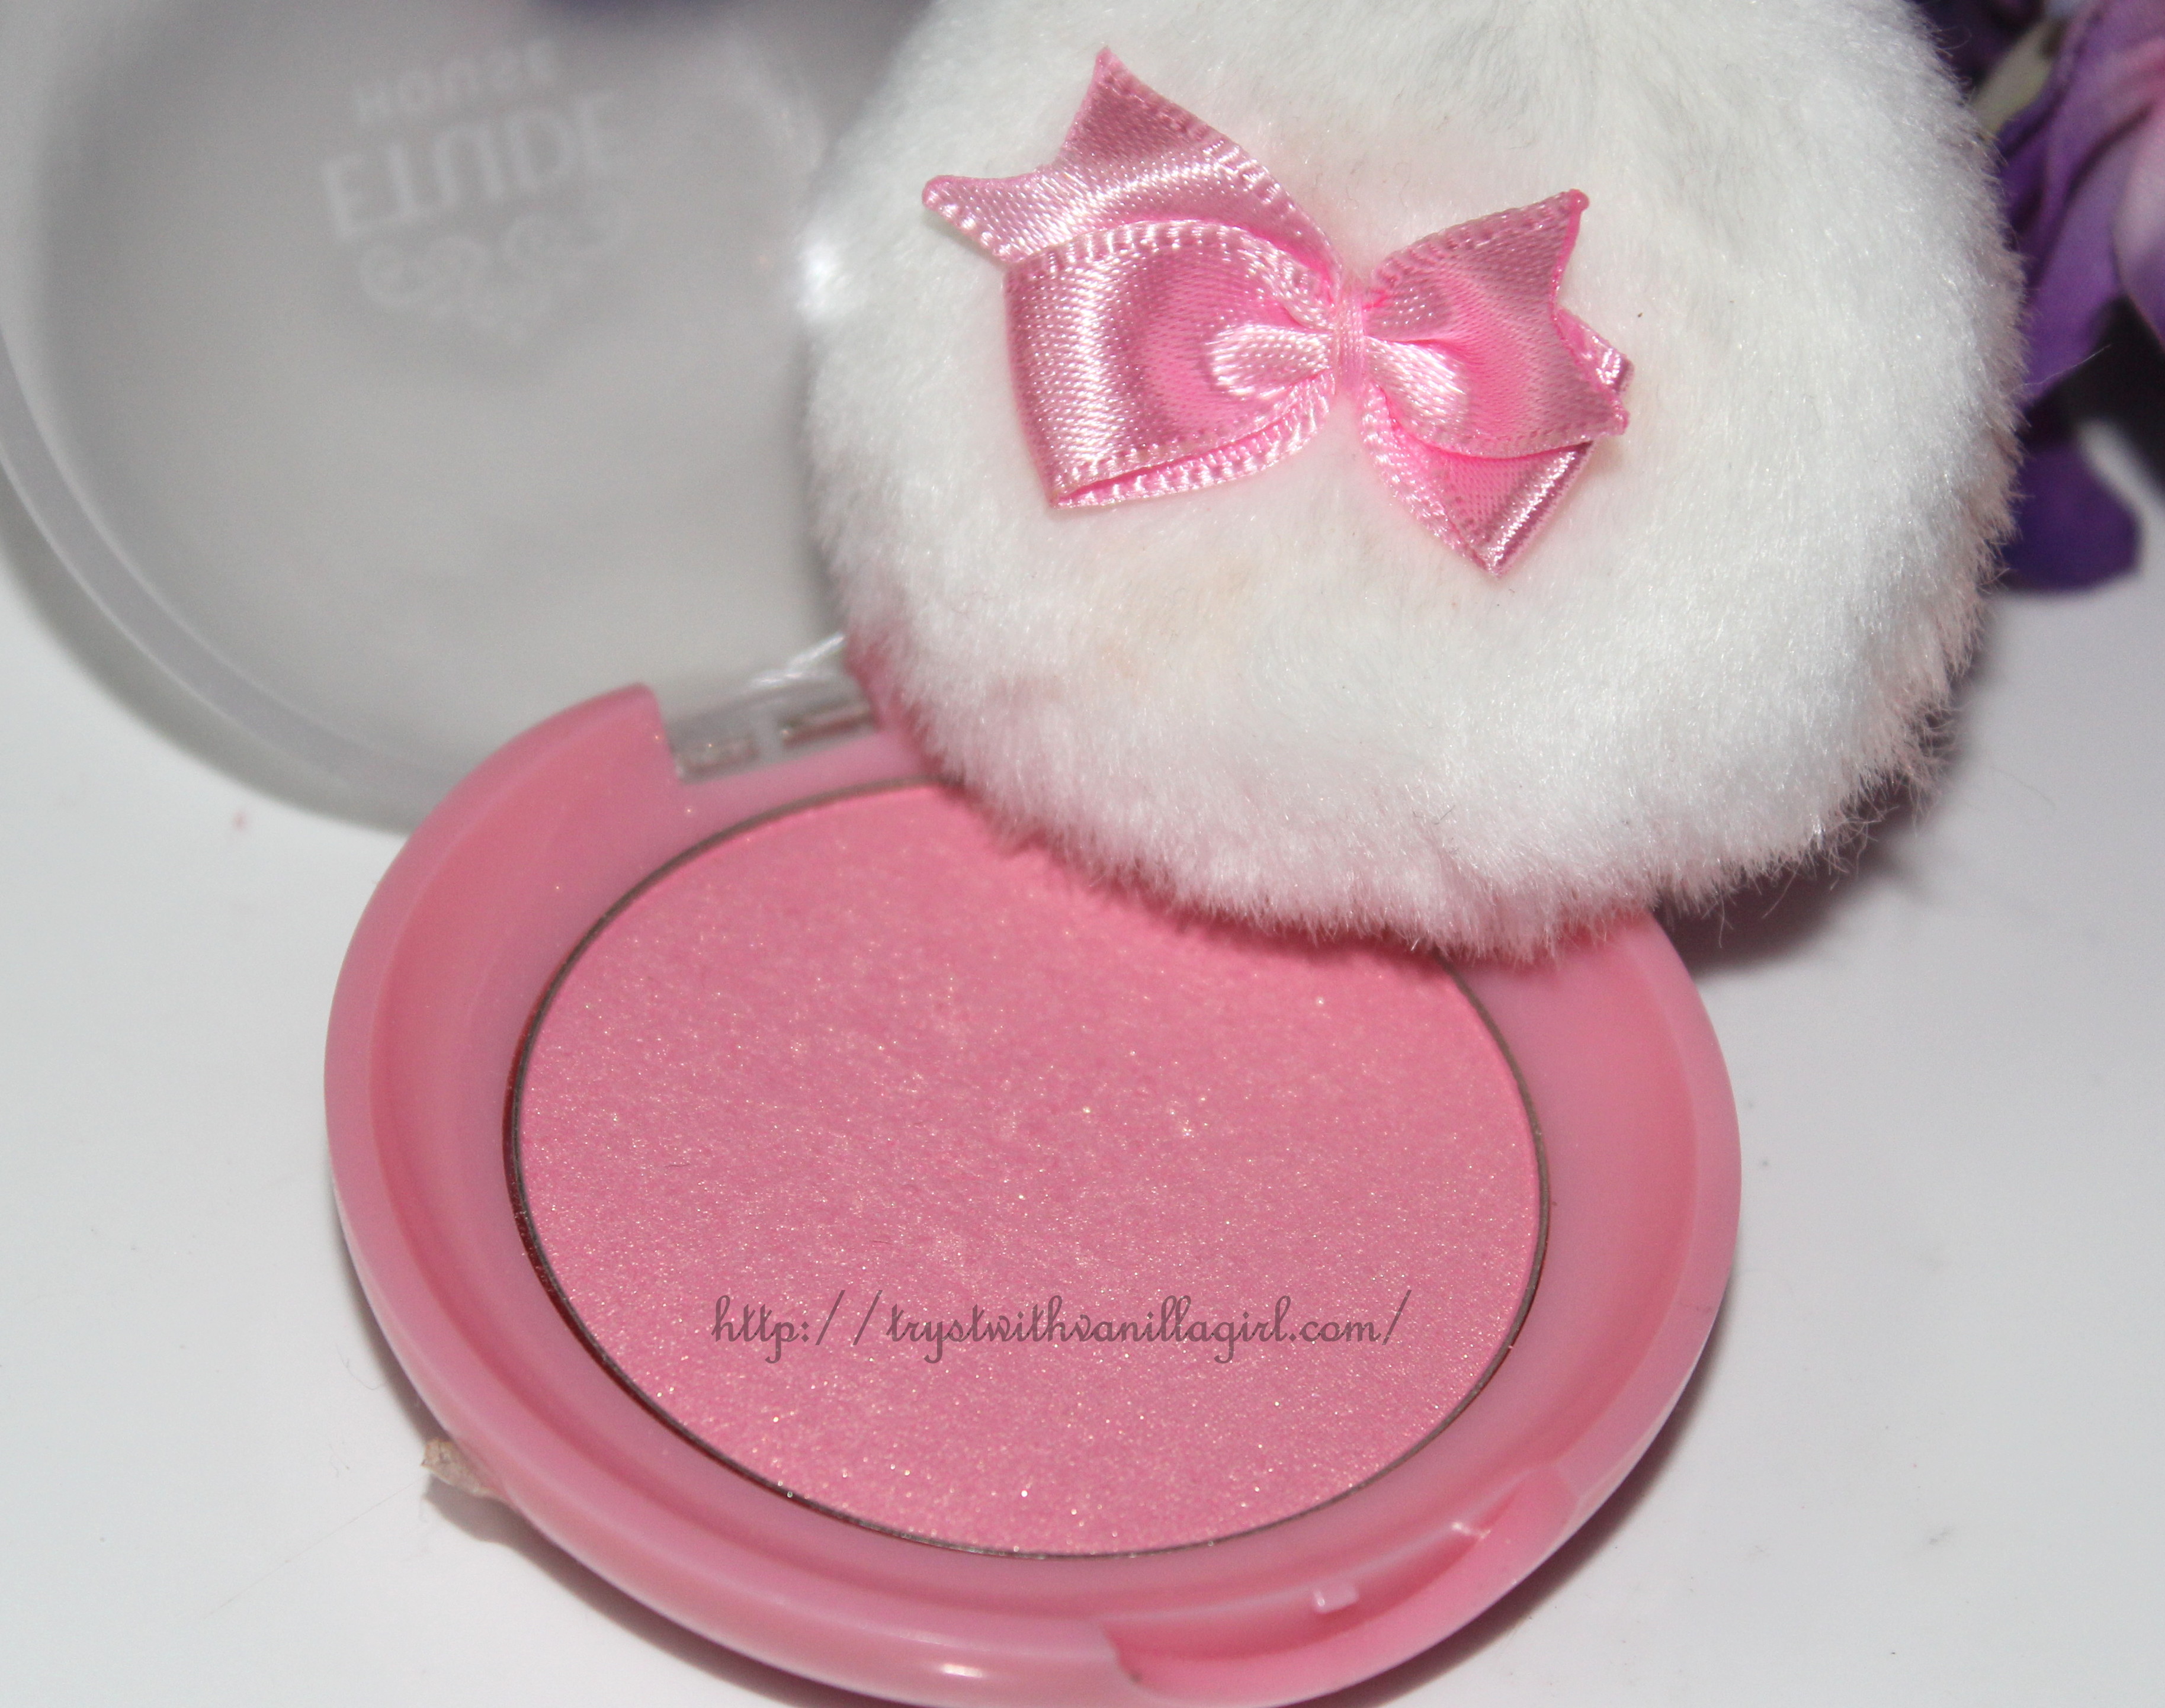 Etude House Lovely Cookie Blusher Rose Sugar Macaron 7 Review,Swatch,Photos